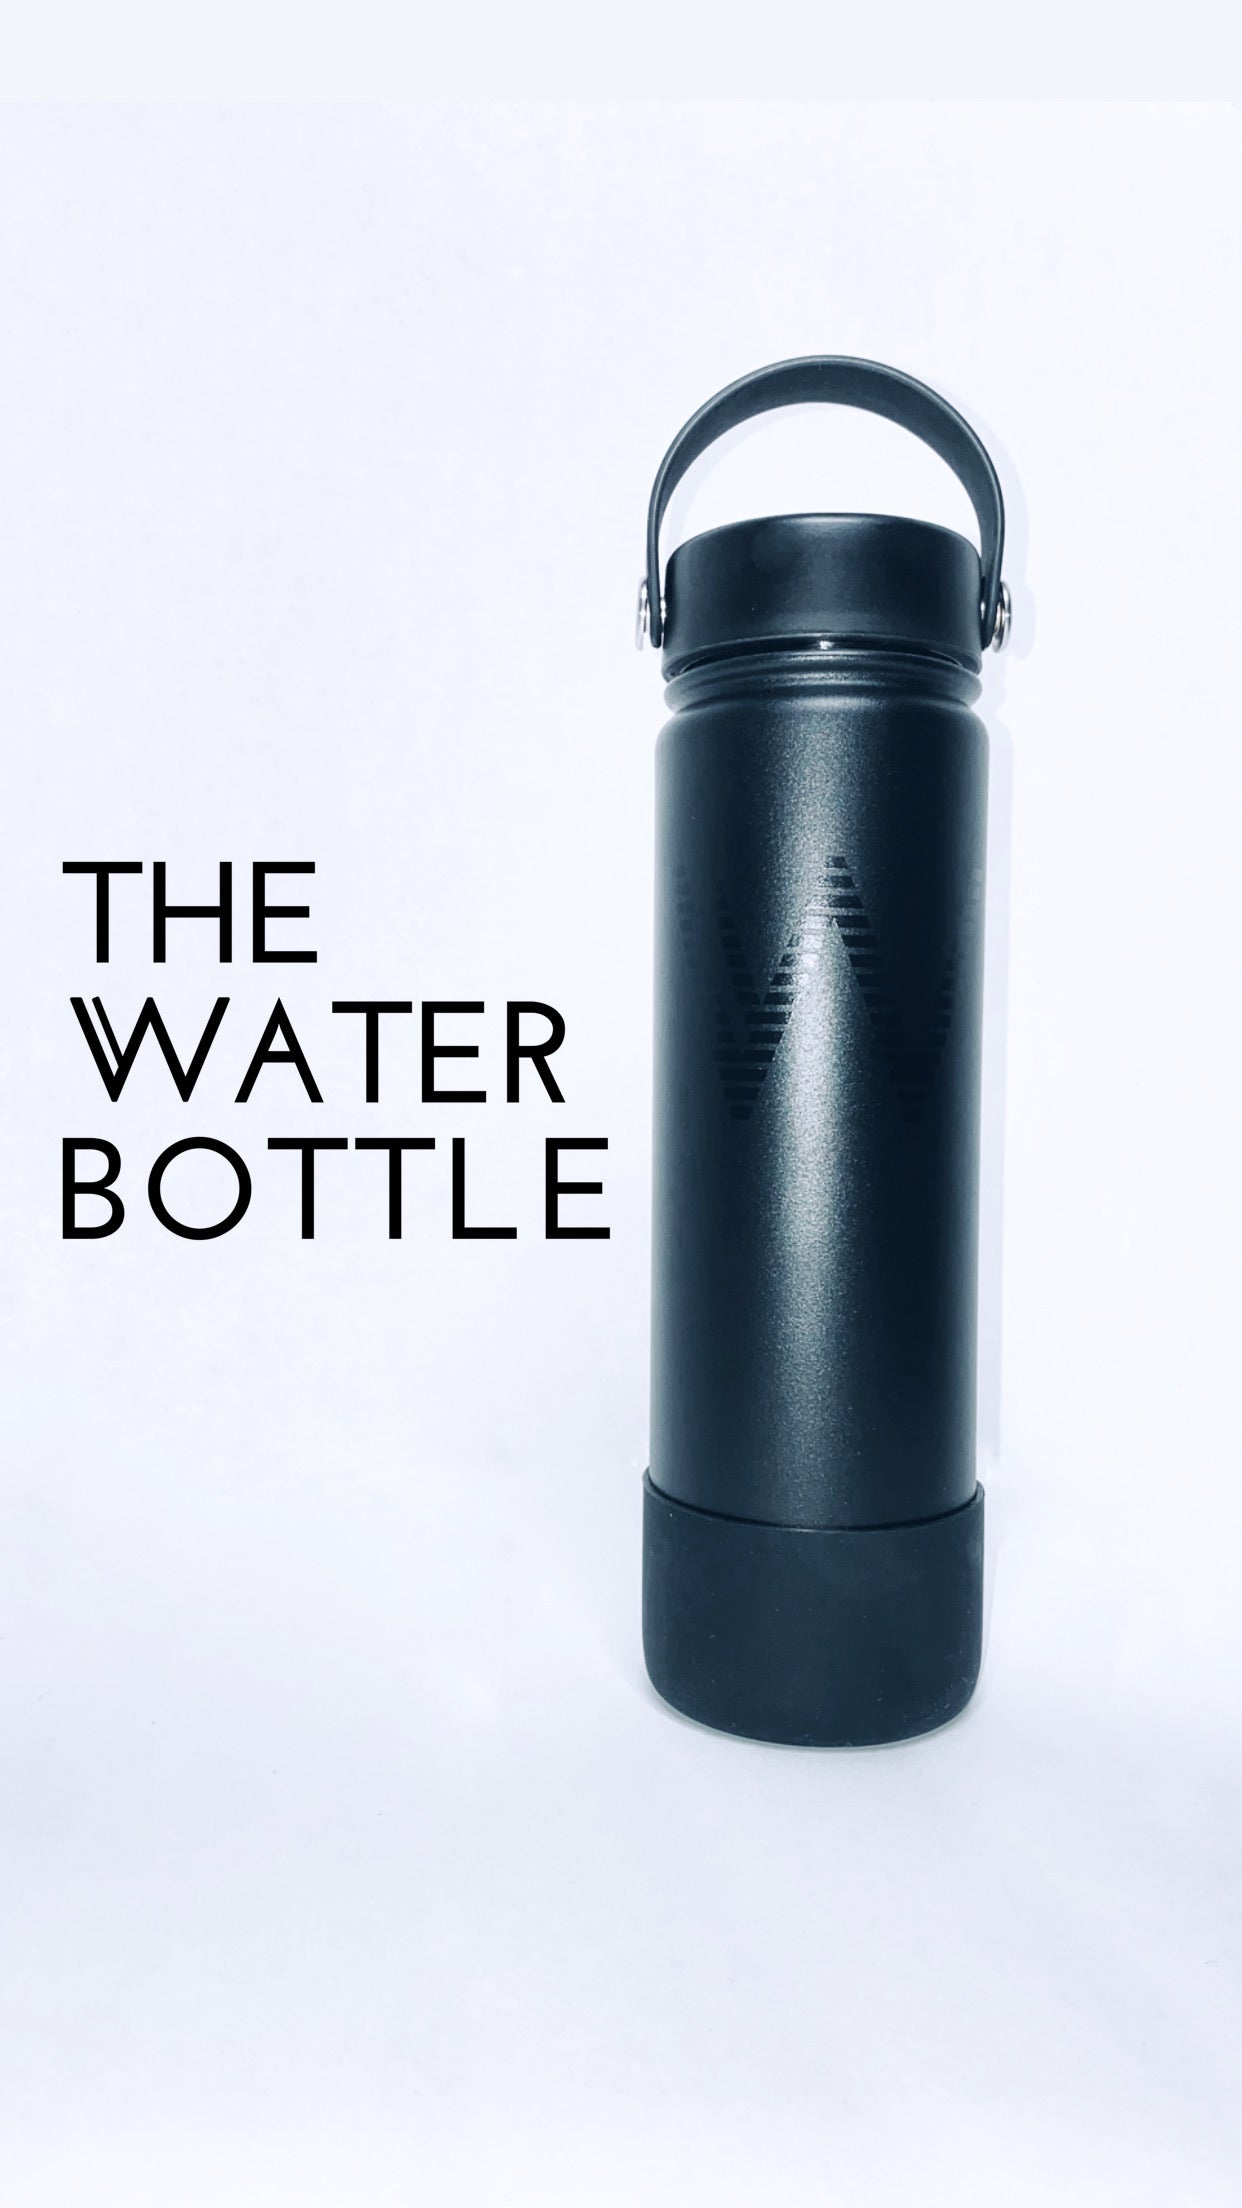 Stainless Steel Insulated Water Bottle